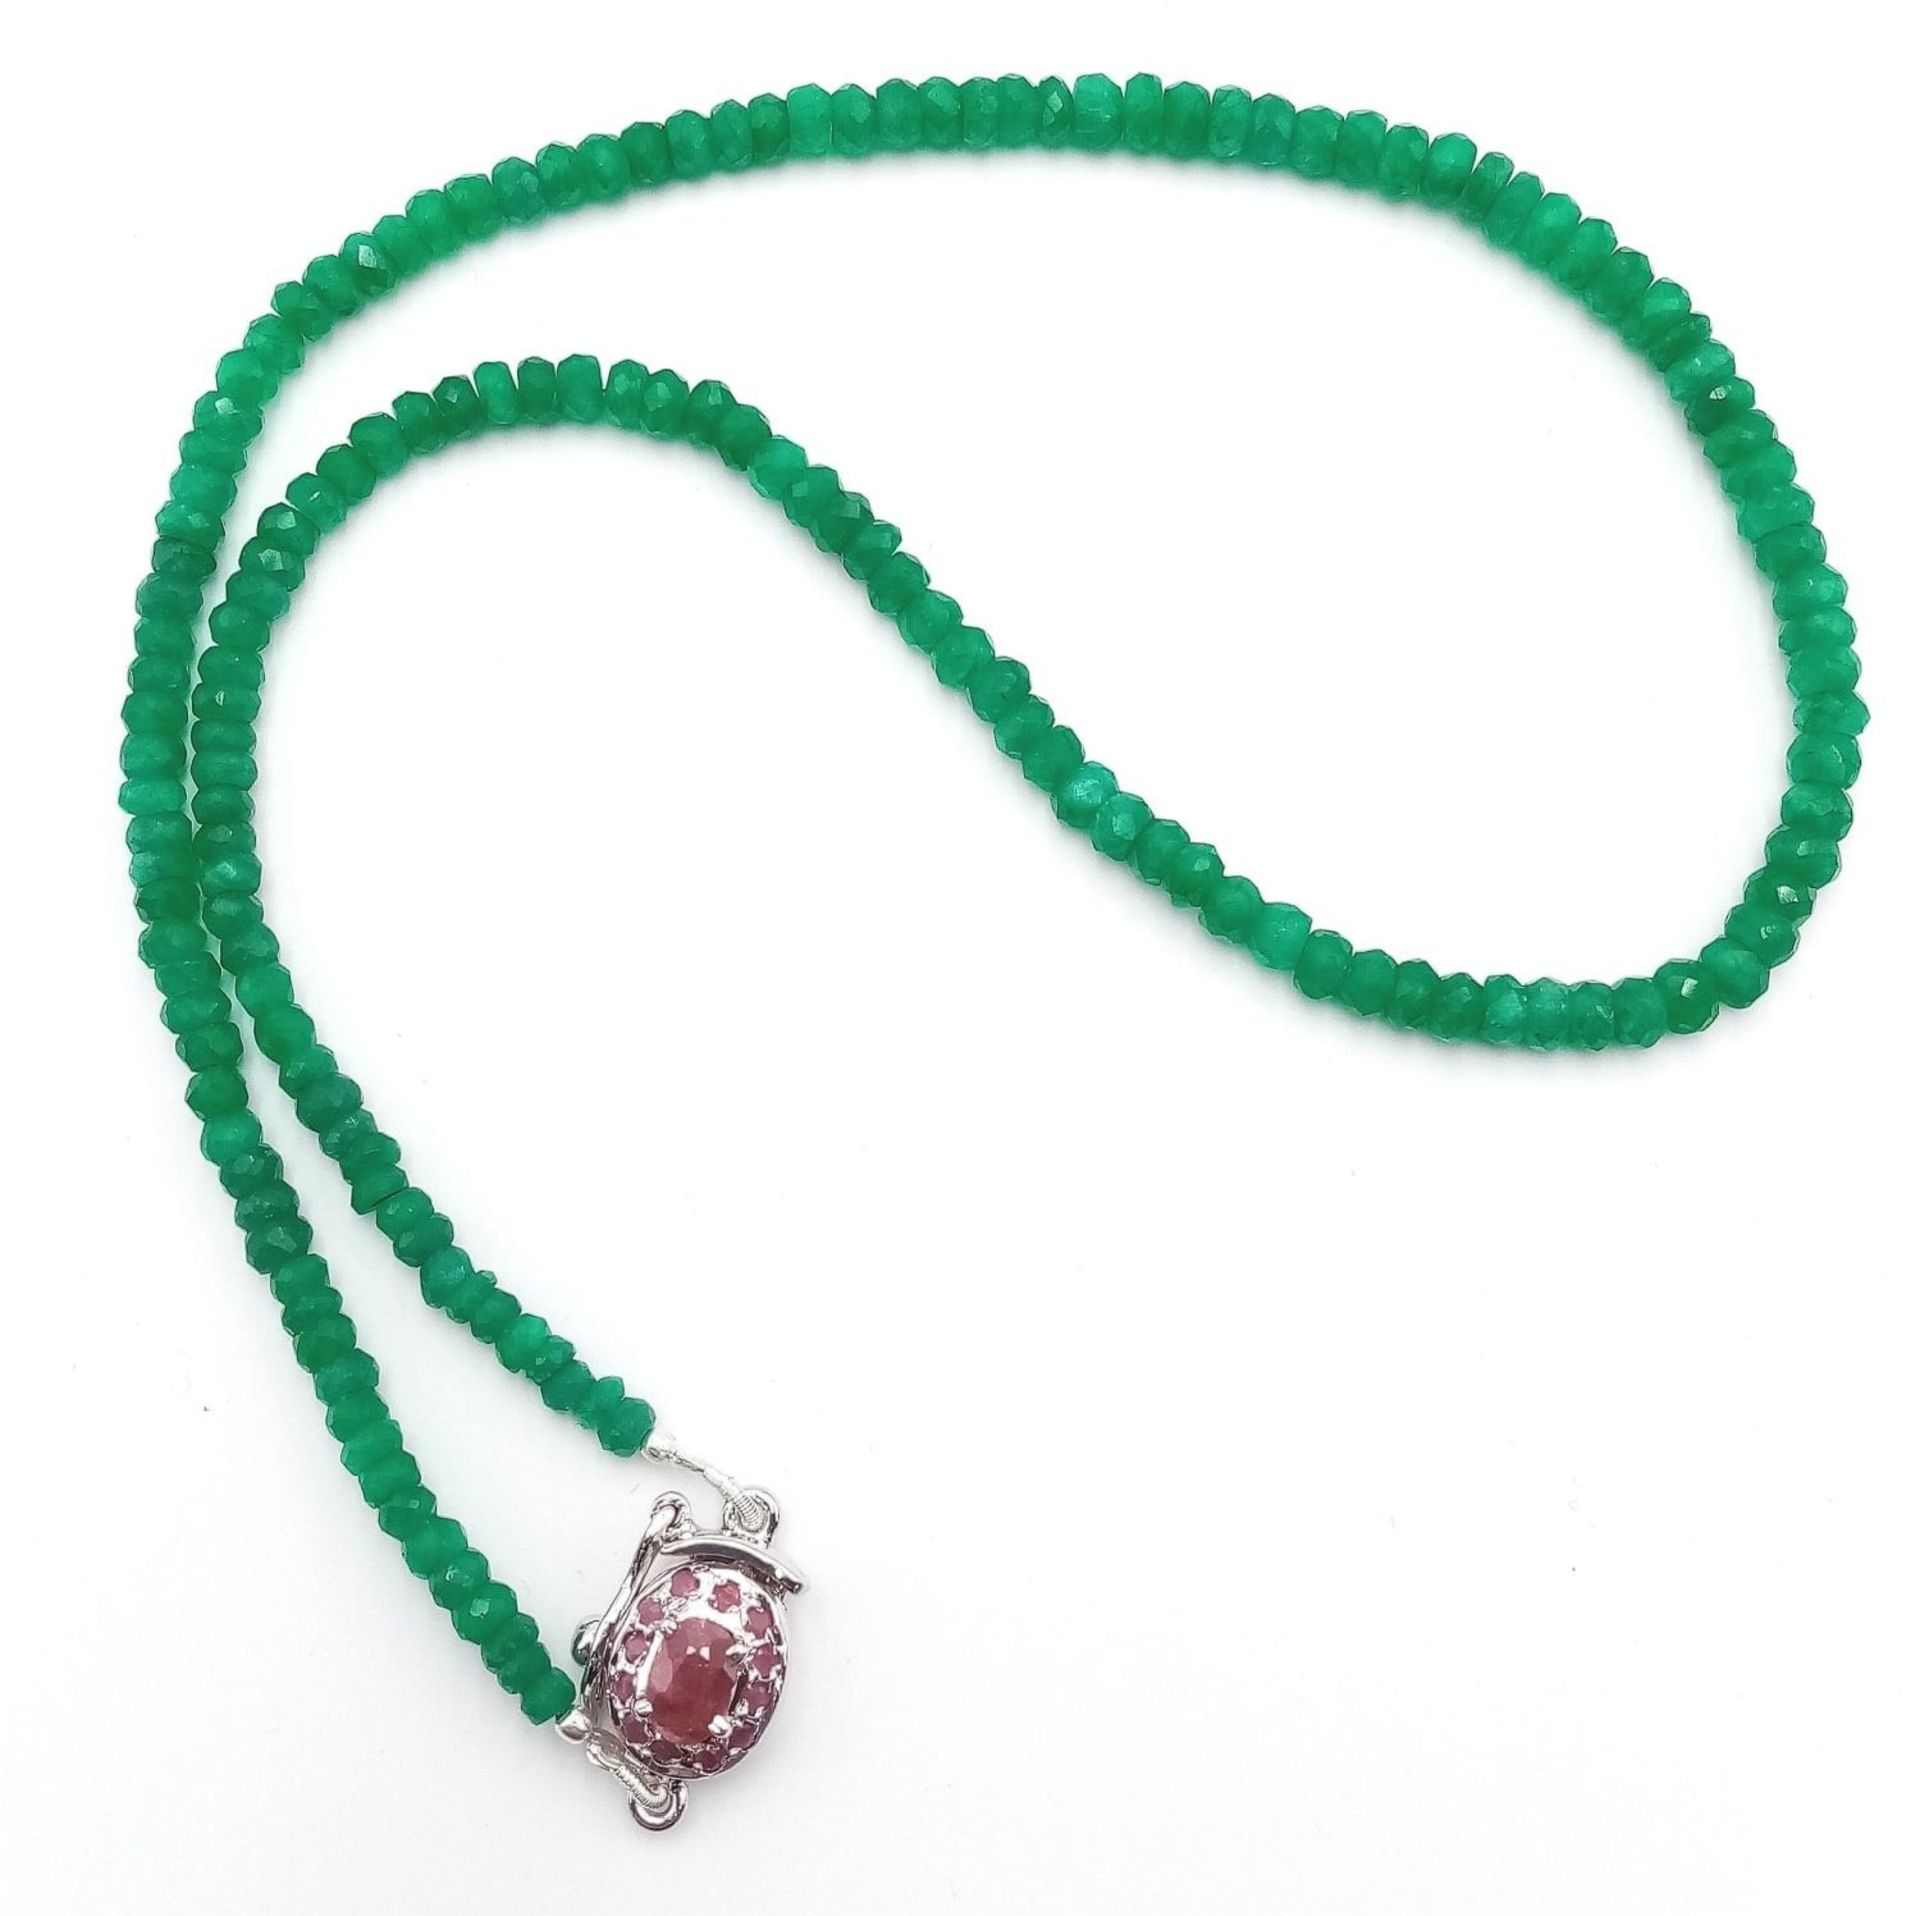 A 95ct Single Strand Emerald Rondelle Necklace with a Ruby and 925 Silver Clasp. 44cm. Ref: Cd-1285 - Bild 3 aus 5